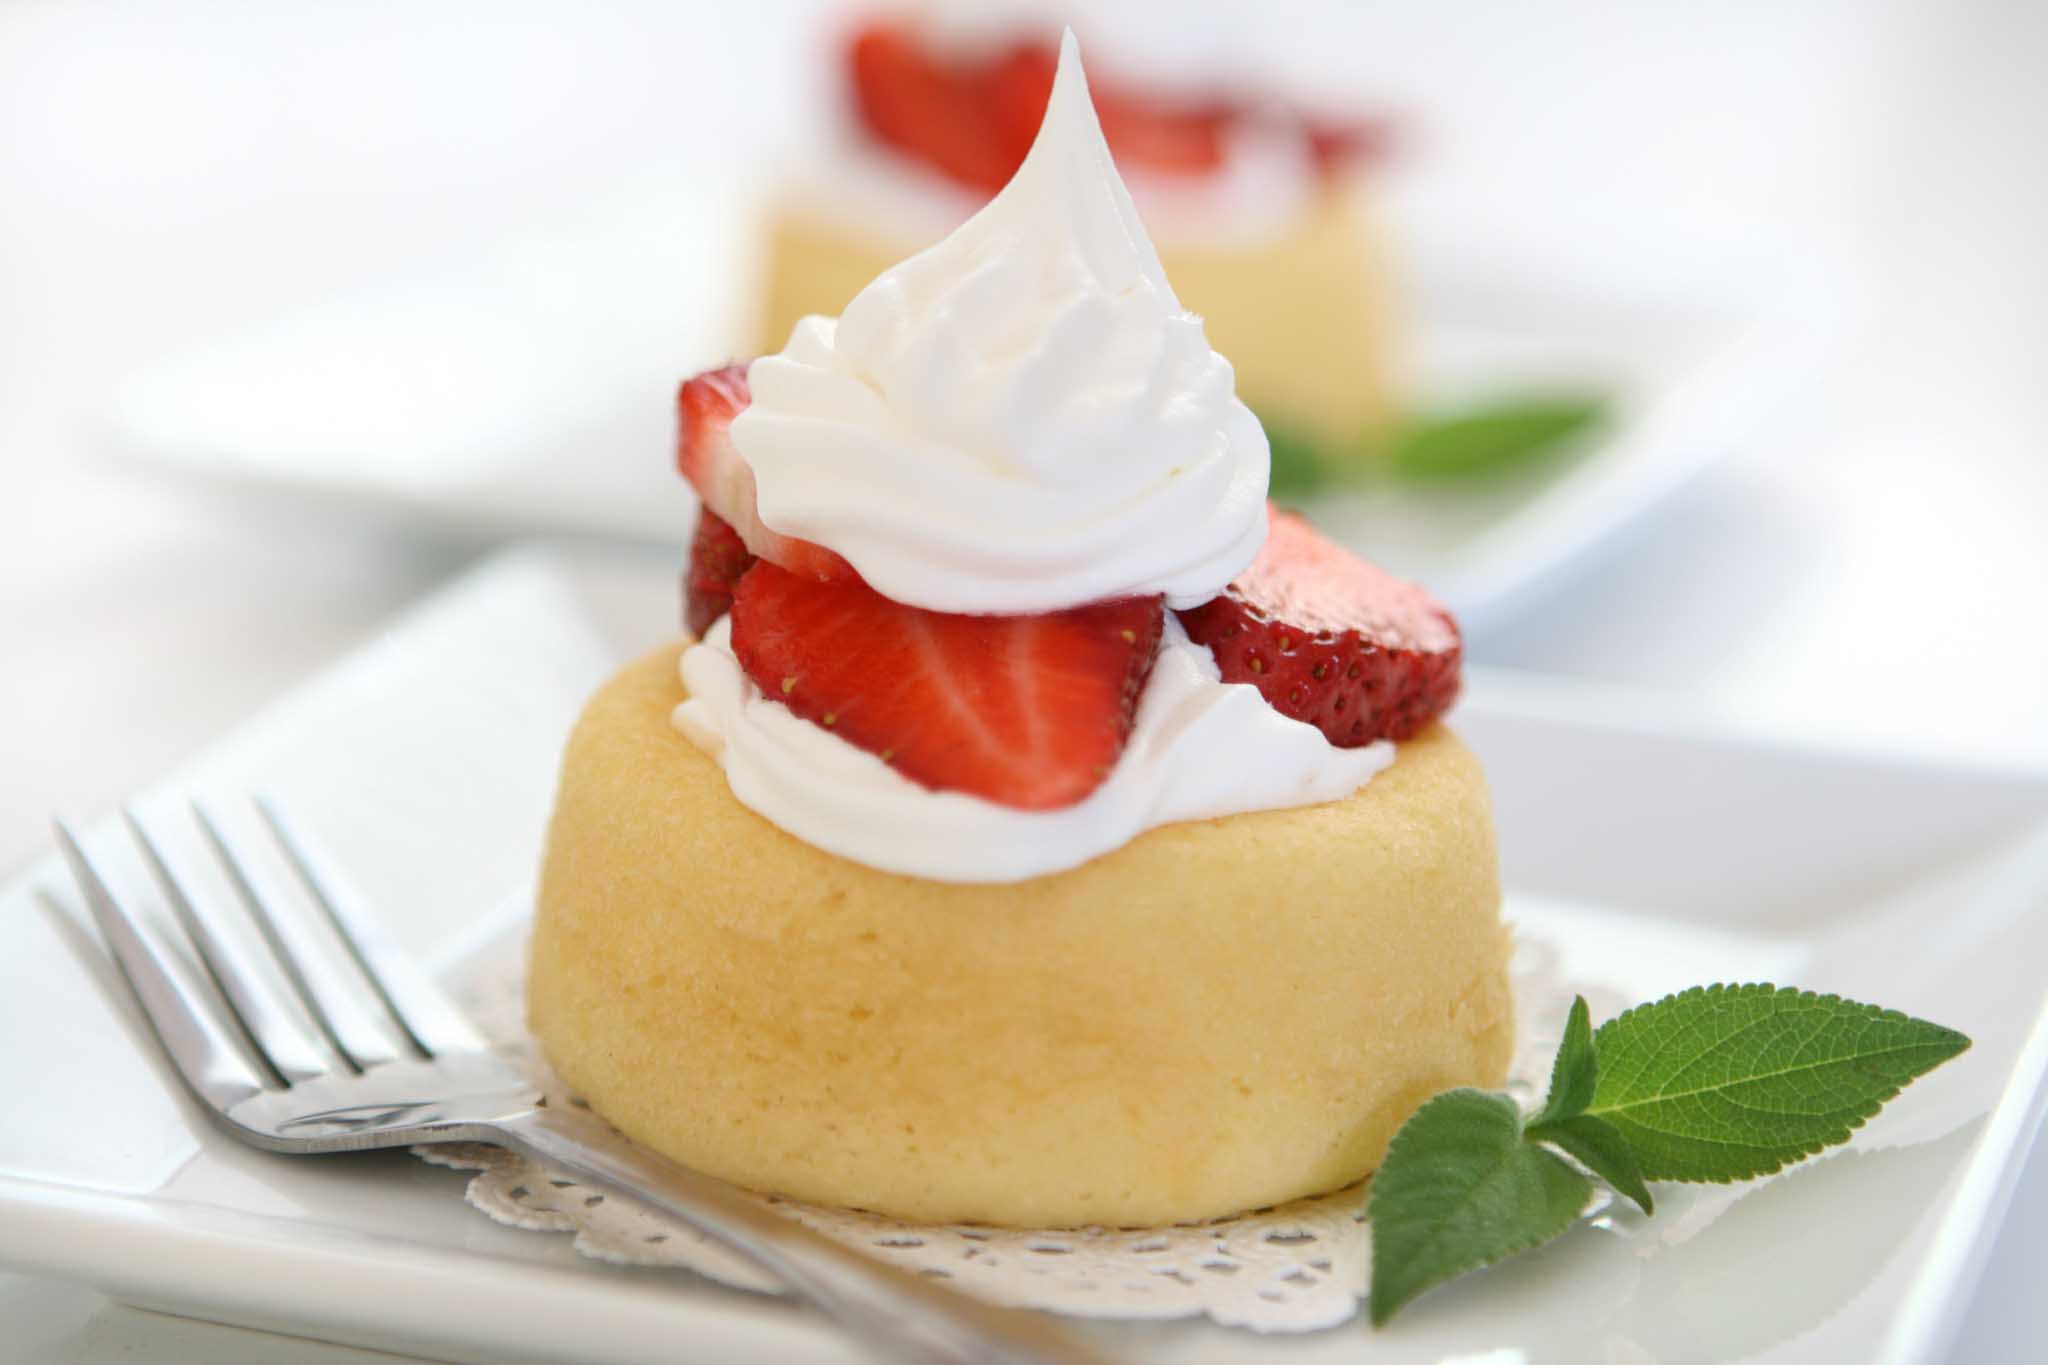 Fresh and organic strawberry shortcake at The Real Food Academy.